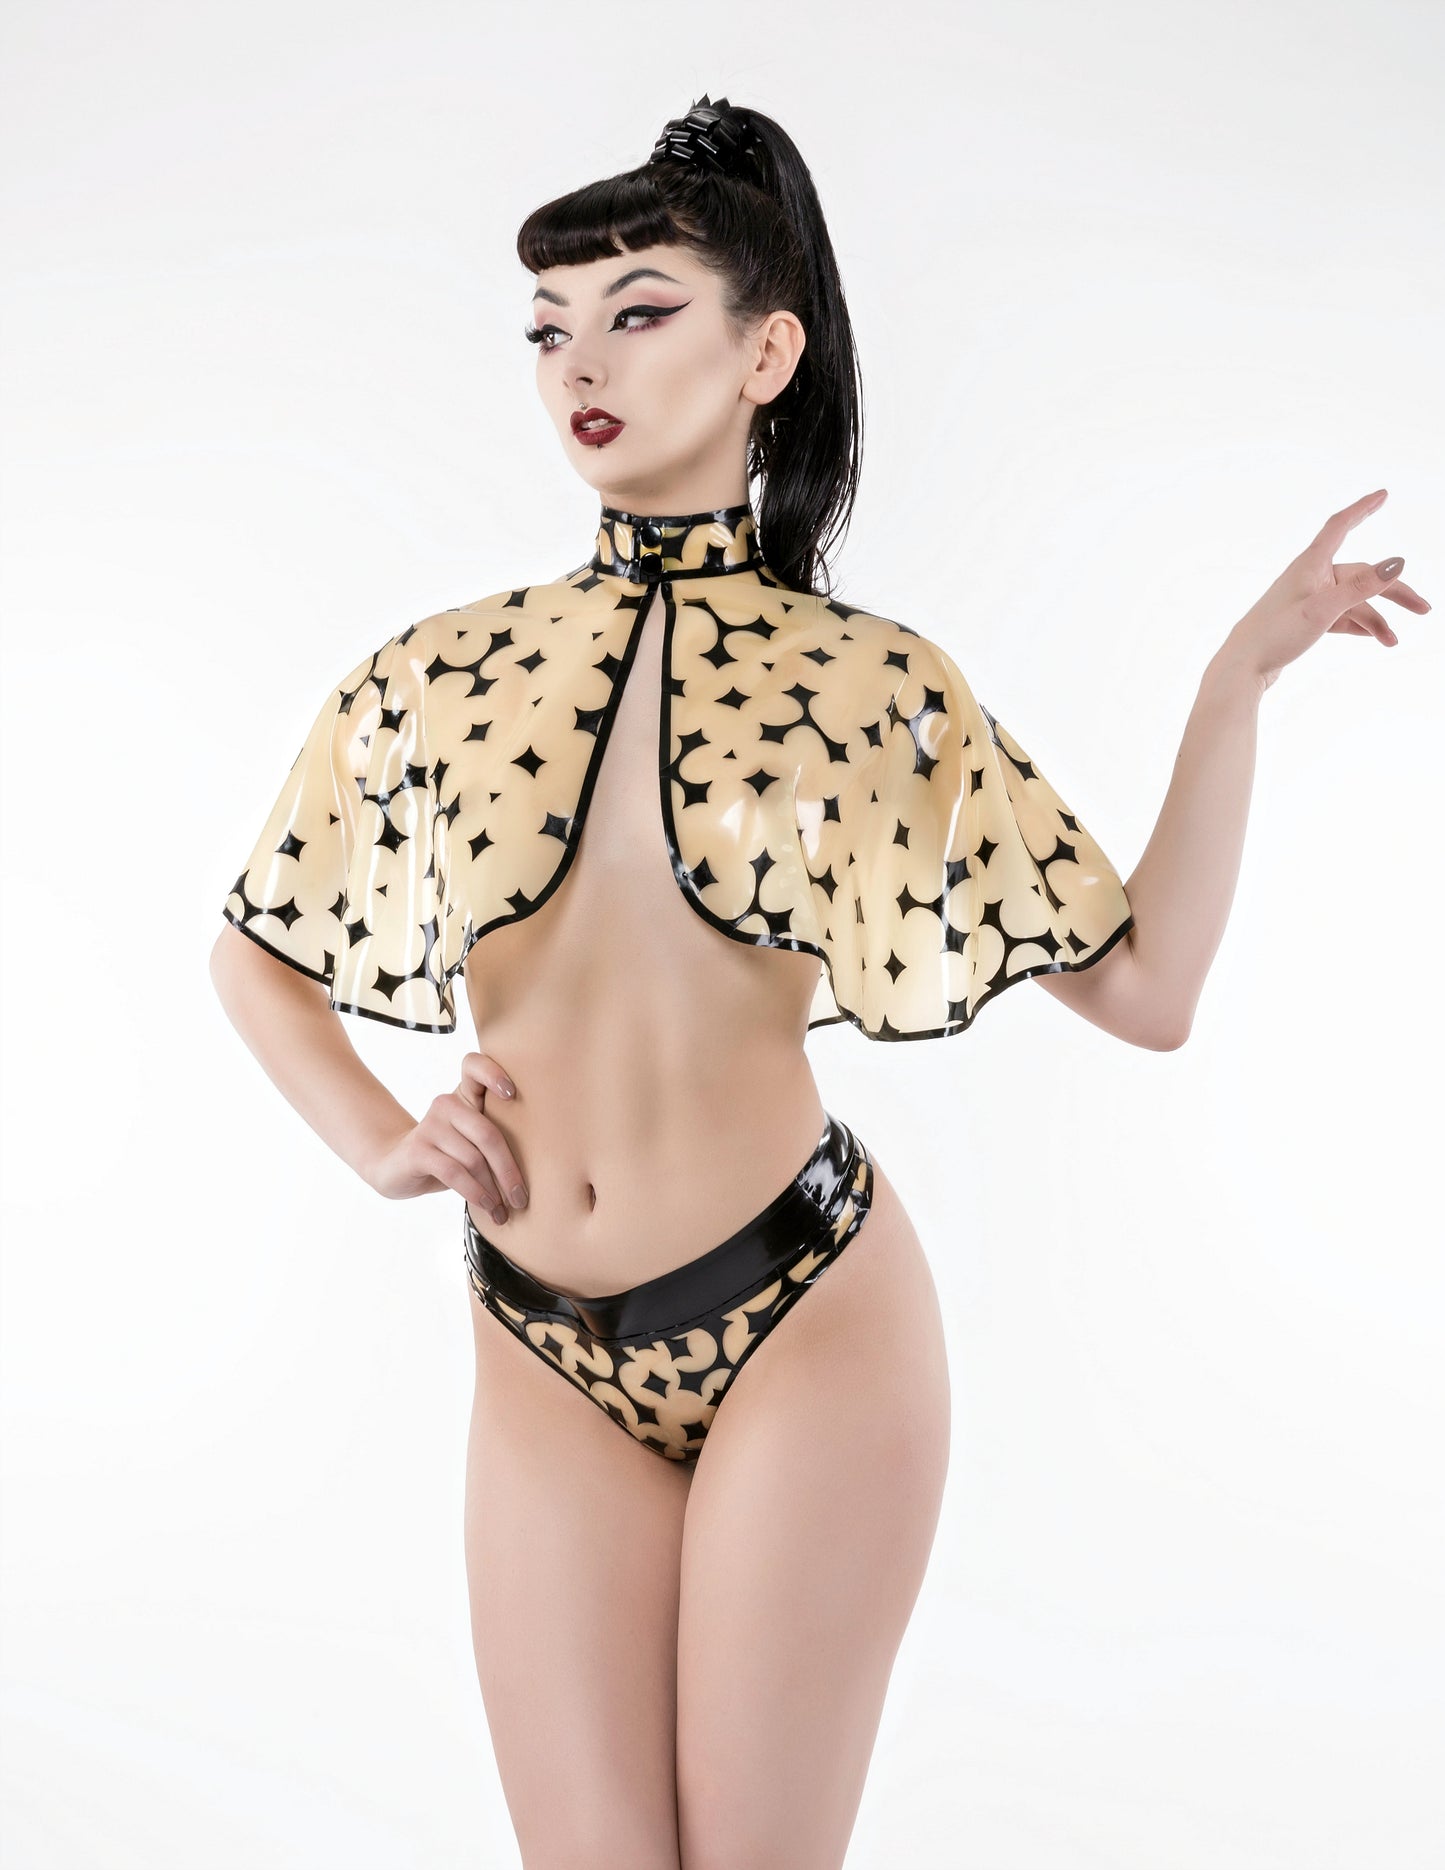 iLLUSION Latex Low Rise Nude Thong